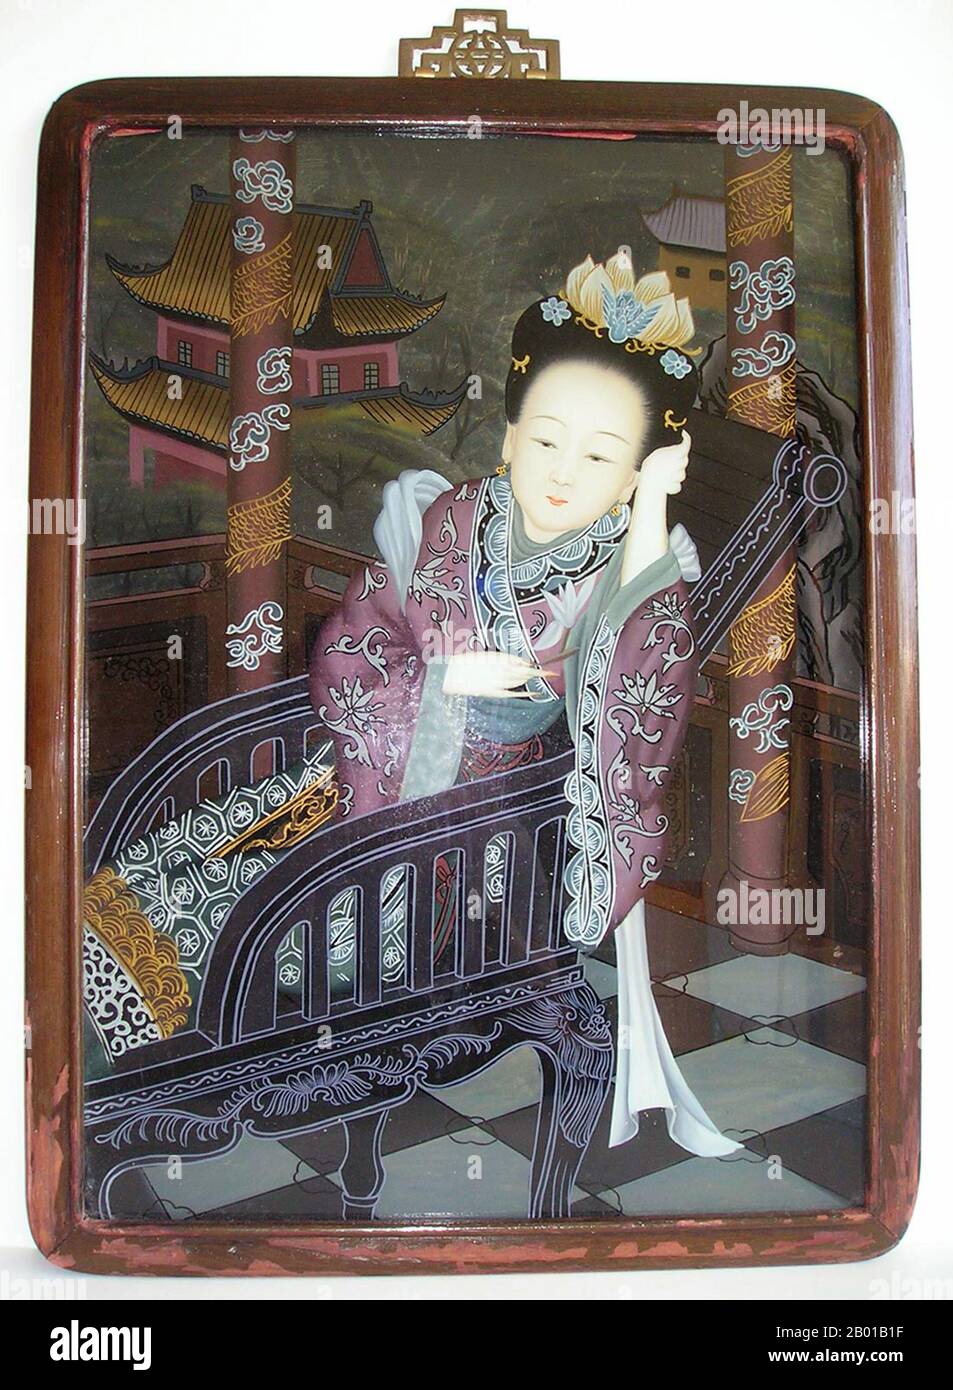 China: Mirror painting of a woman reclining in a chair, late Qing Dynasty, c. 1840-1860.  Reverse painting on glass is an art form consisting of applying paint to a piece of glass and then viewing the image by turning the glass over and looking through the glass at the image. Stock Photo